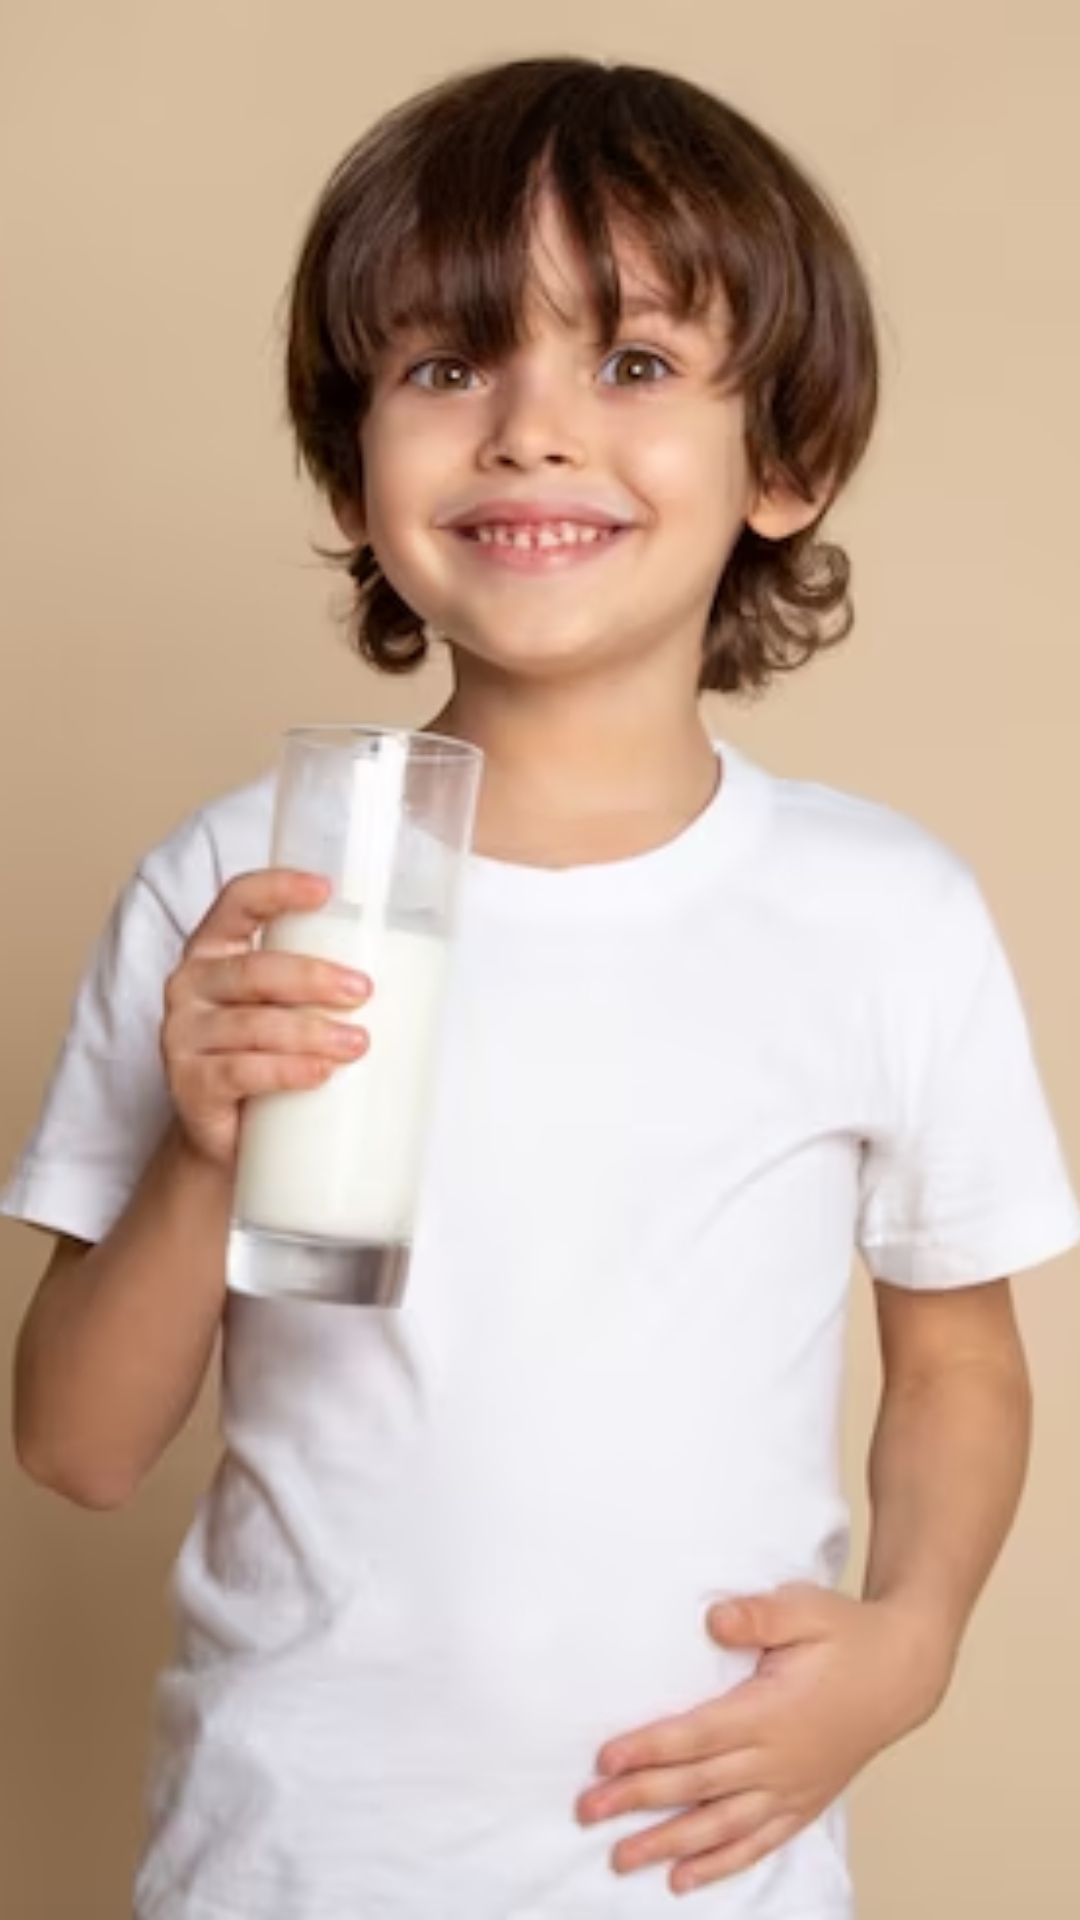 Different types of milk and their health benefits you didn't know